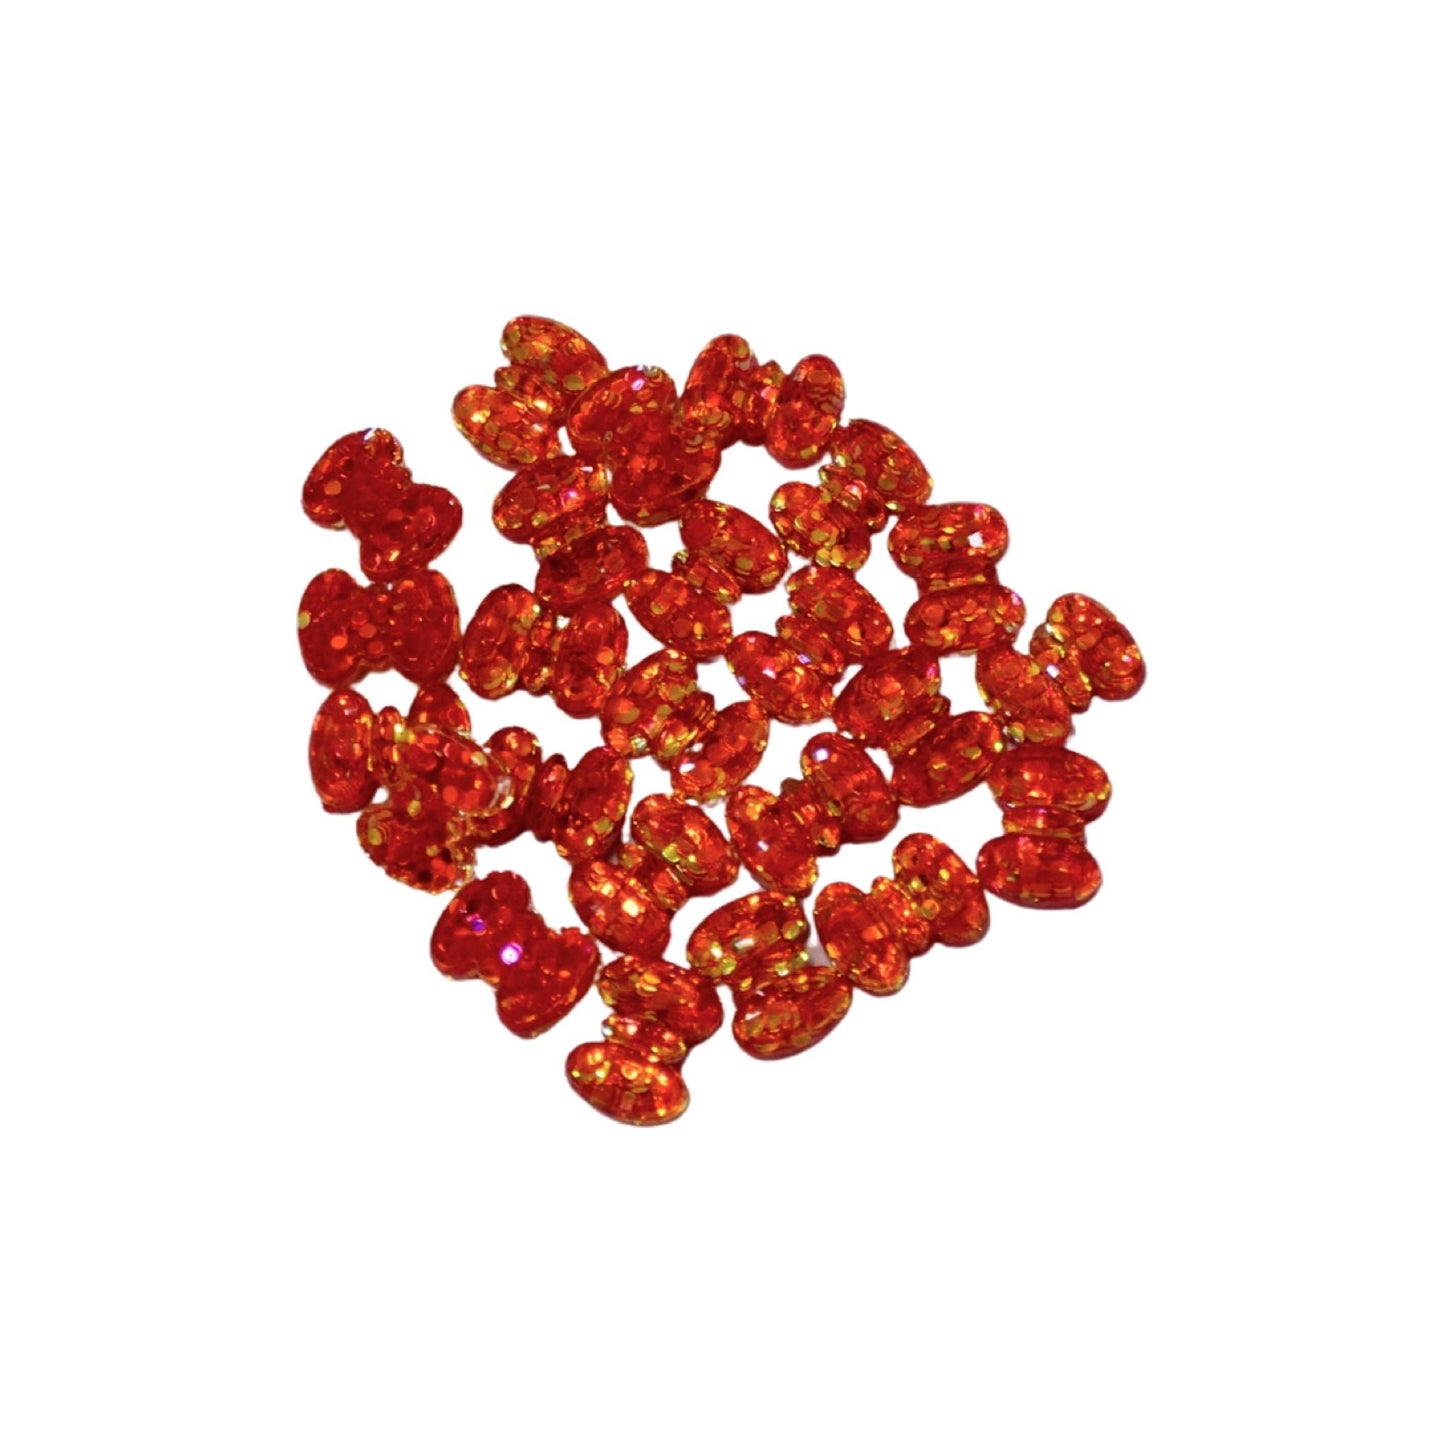 Indian Petals Small Resin Glittery Bow Flat-back Cabochons Motif for Craft Decoration or Rakhi - 12449, Glittery  Red